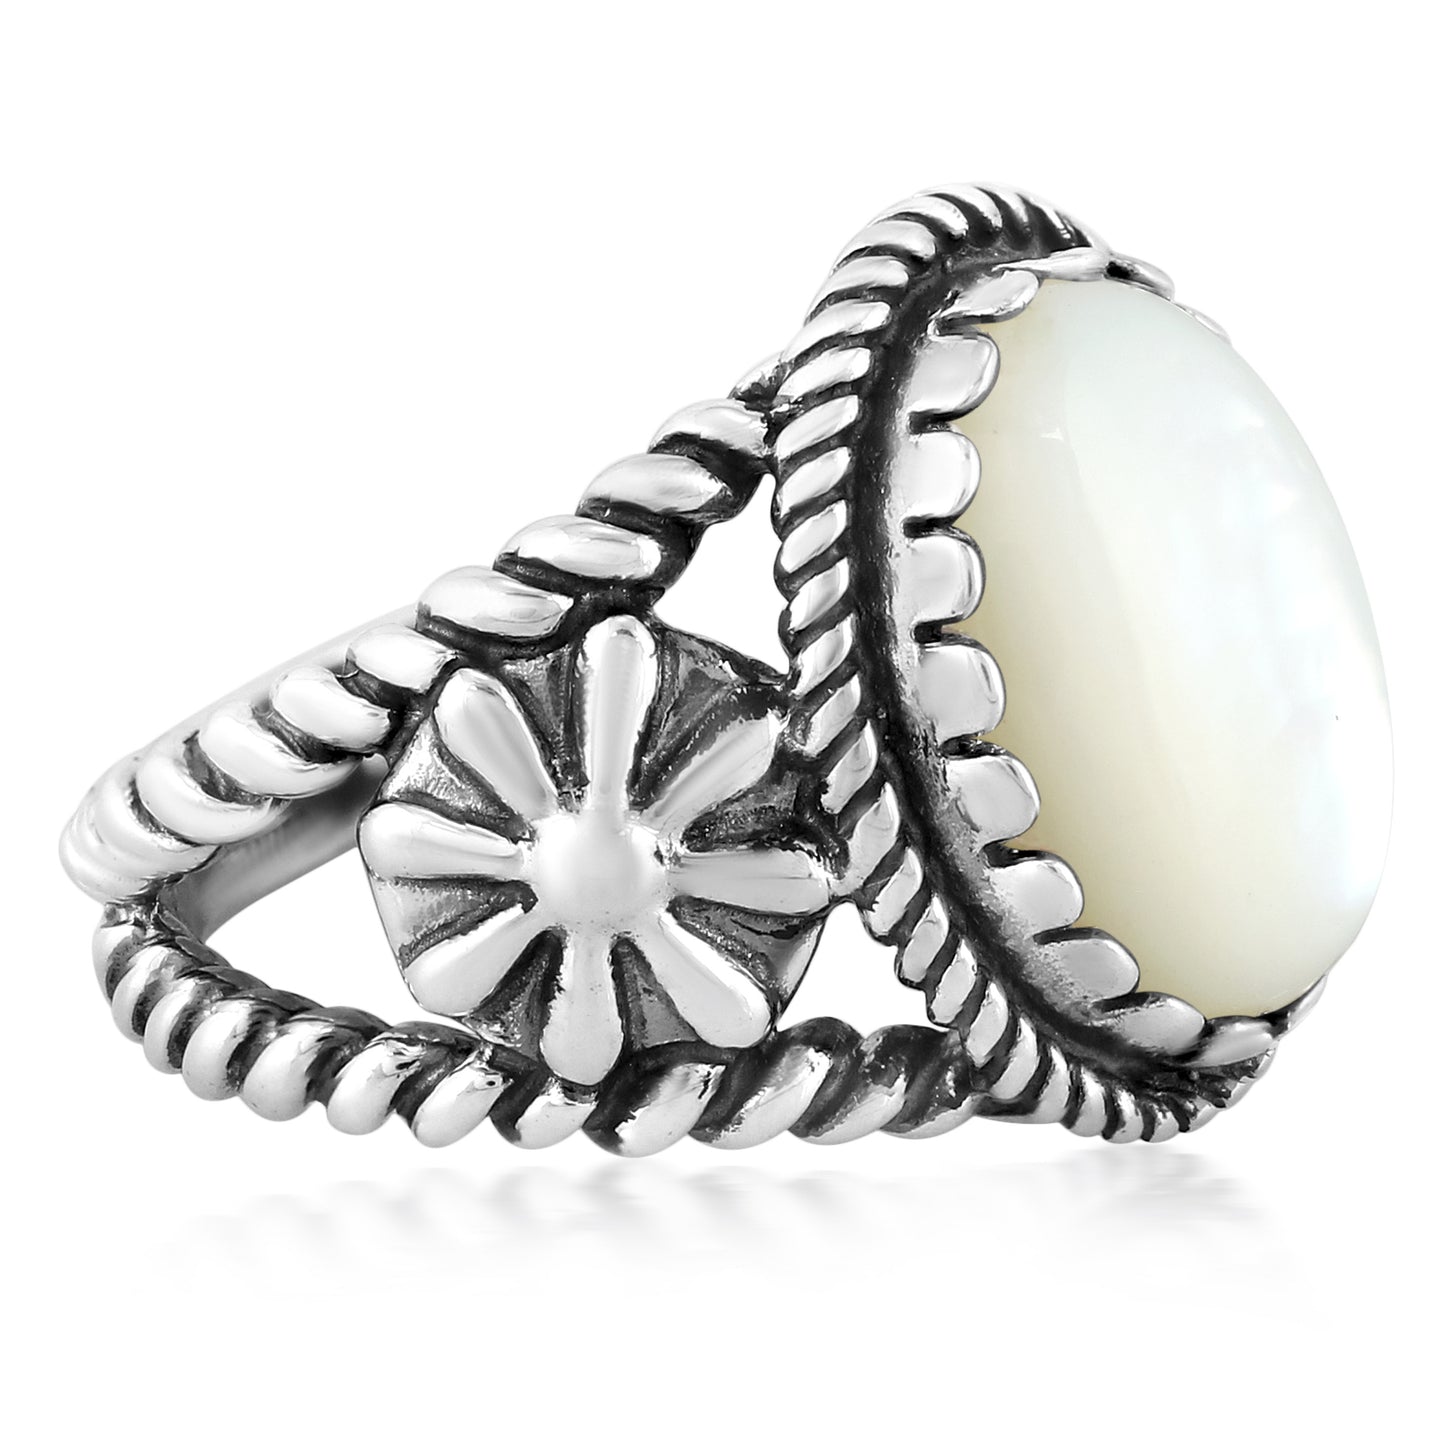 Southwestern Sterling Silver with White Mother of Pearl Gemstone Native-Inspired Concha Flower Design Ring, Sizes 5-10